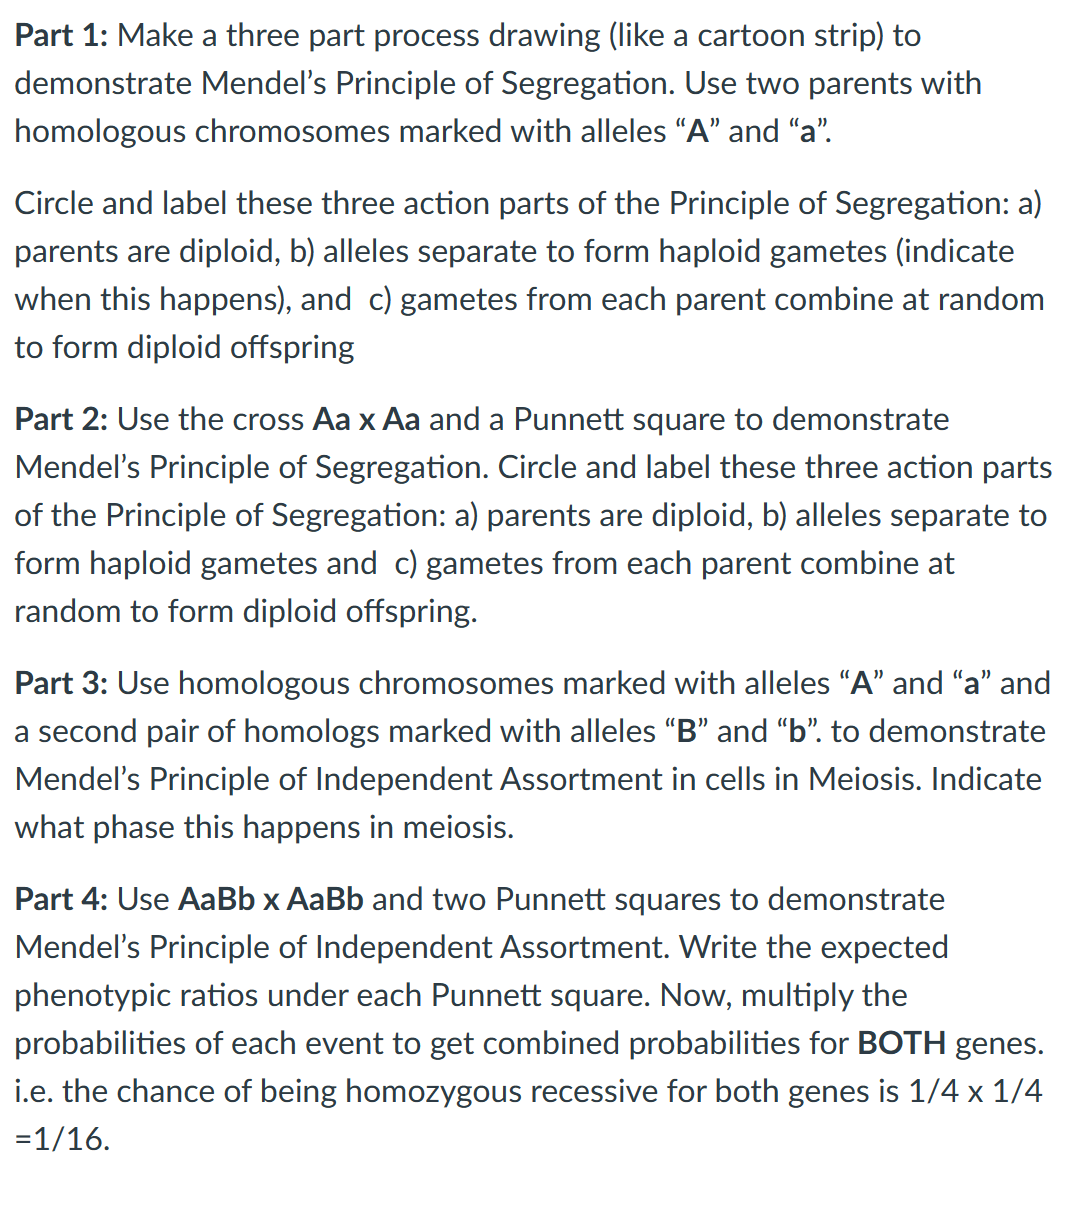 Part 1: Make a three part process drawing (like a cartoon strip) to
demonstrate Mendel's Principle of Segregation. Use two parents with
homologous chromosomes marked with alleles "A" and "a".
Circle and label these three action parts of the Principle of Segregation: a)
parents are diploid, b) alleles separate to form haploid gametes (indicate
when this happens), and c) gametes from each parent combine at random
to form diploid offspring
Part 2: Use the cross Aa x Aa and a Punnett square to demonstrate
Mendel's Principle of Segregation. Circle and label these three action parts
of the Principle of Segregation: a) parents are diploid, b) alleles separate to
form haploid gametes and c) gametes from each parent combine at
random to form diploid offspring.
Part 3: Use homologous chromosomes marked with alleles "A" and "a" and
a second pair of homologs marked with alleles "B" and "b". to demonstrate
Mendel's Principle of Independent Assortment in cells in Meiosis. Indicate
what phase this happens in meiosis.
Part 4: Use AaBb x AaBb and two Punnett squares to demonstrate
Mendel's Principle of Independent Assortment. Write the expected
phenotypic ratios under each Punnett square. Now, multiply the
probabilities of each event to get combined probabilities for BOTH genes.
i.e. the chance of being homozygous recessive for both genes is 1/4 x 1/4
=1/16.